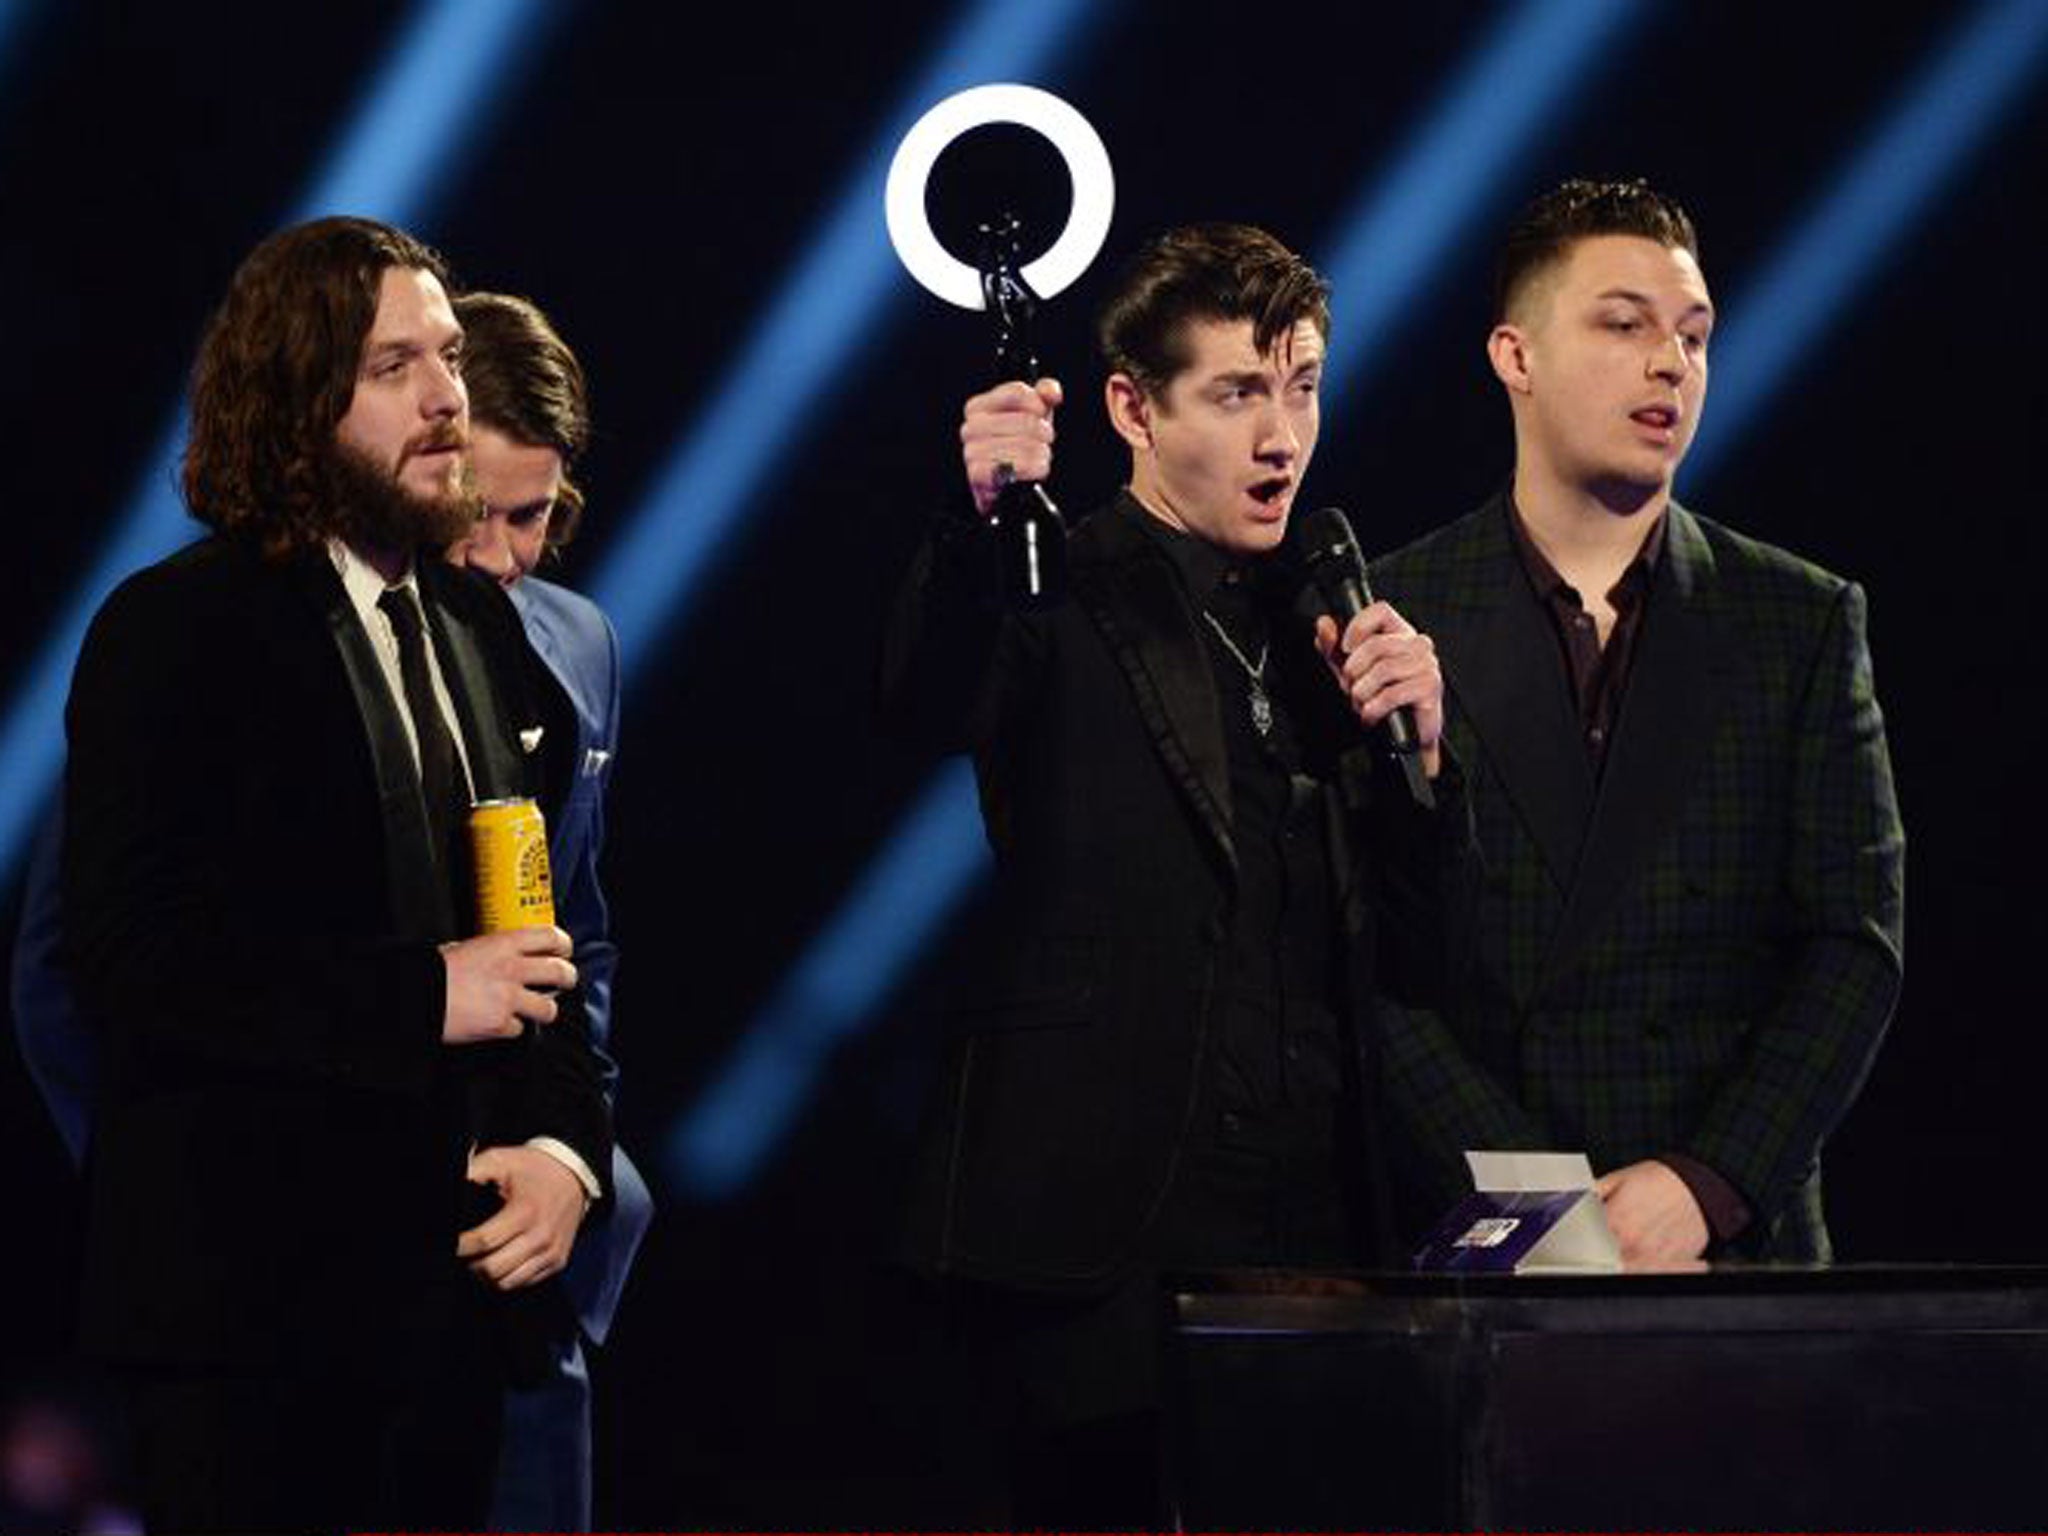 Arctic Monkeys with their award for Best British Group. The band also won Best Album